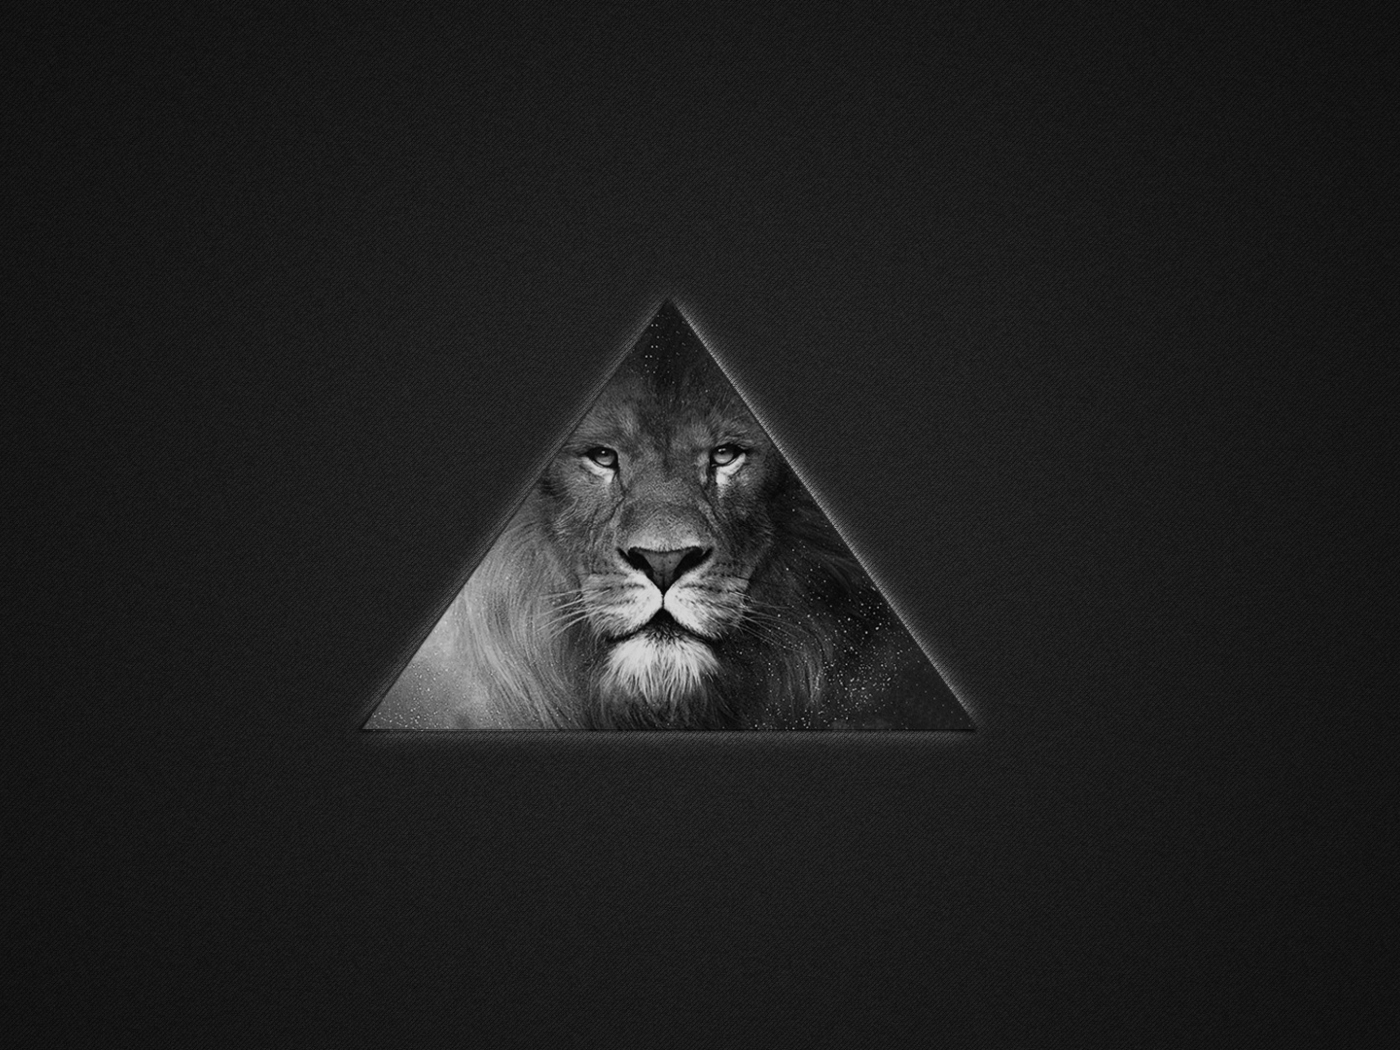 Lion's Black And White Triangle wallpaper 1400x1050